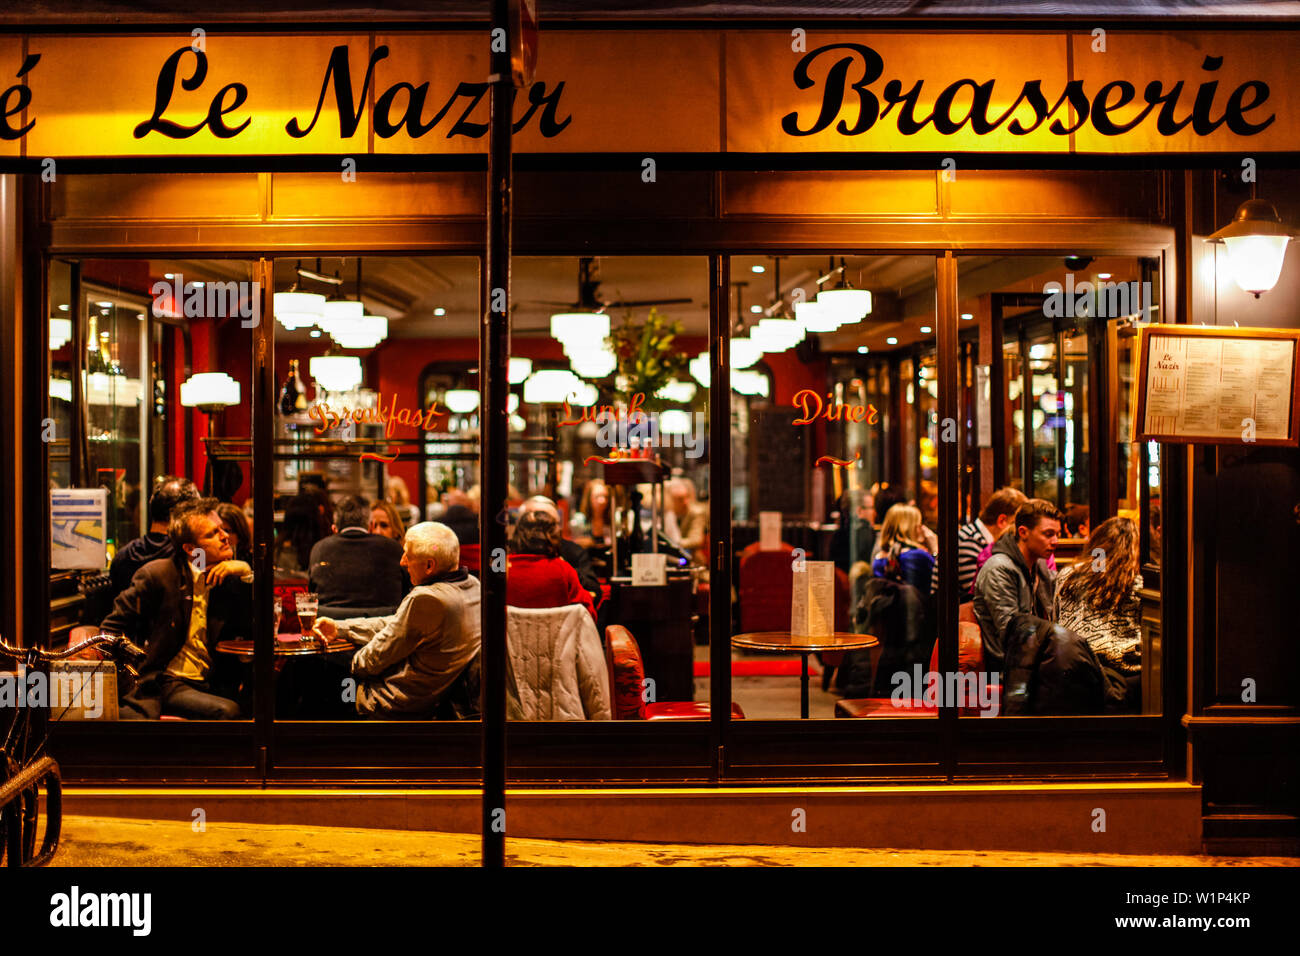 People in the Brasserie cafe le nazir, 56 Rue des Abbesses, Montmartre, 75018 Paris, France, Europe Stock Photo